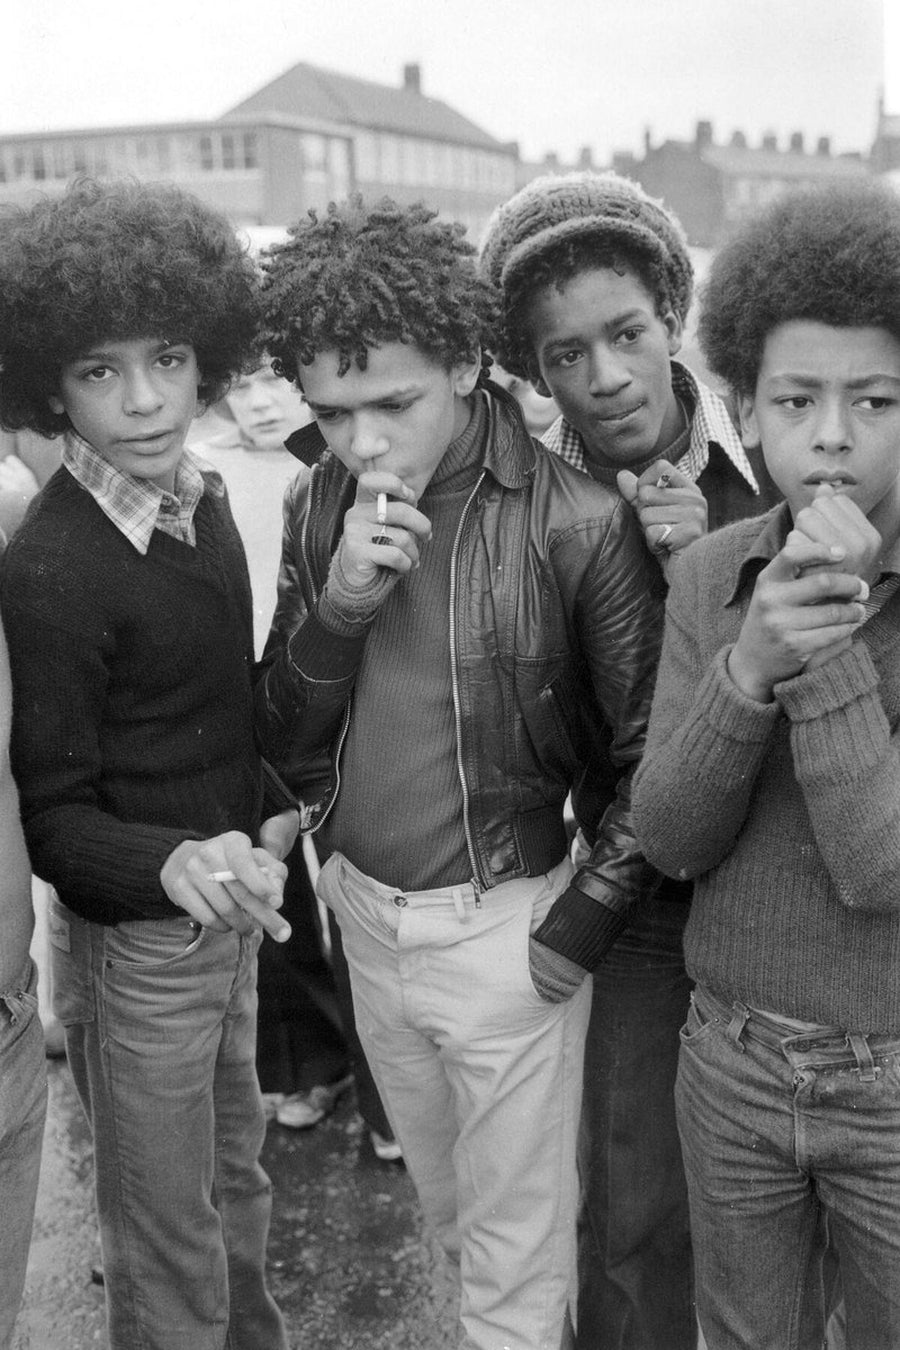 Four Teenagers Smoking in Manchester by Iain SP Reid - c.1976